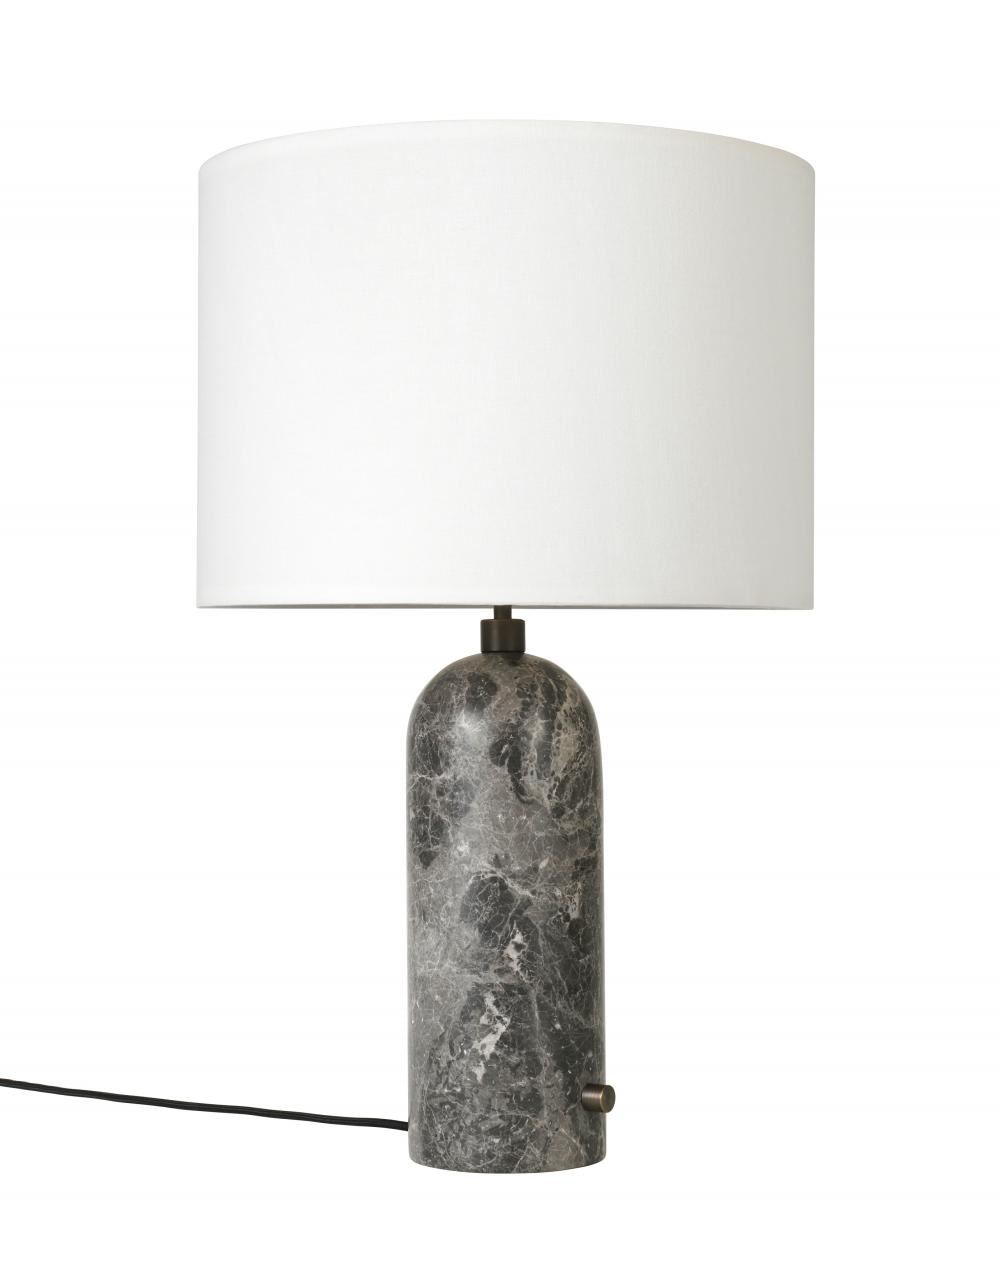 Gravity Table Lamp Large Grey Marble White Shade